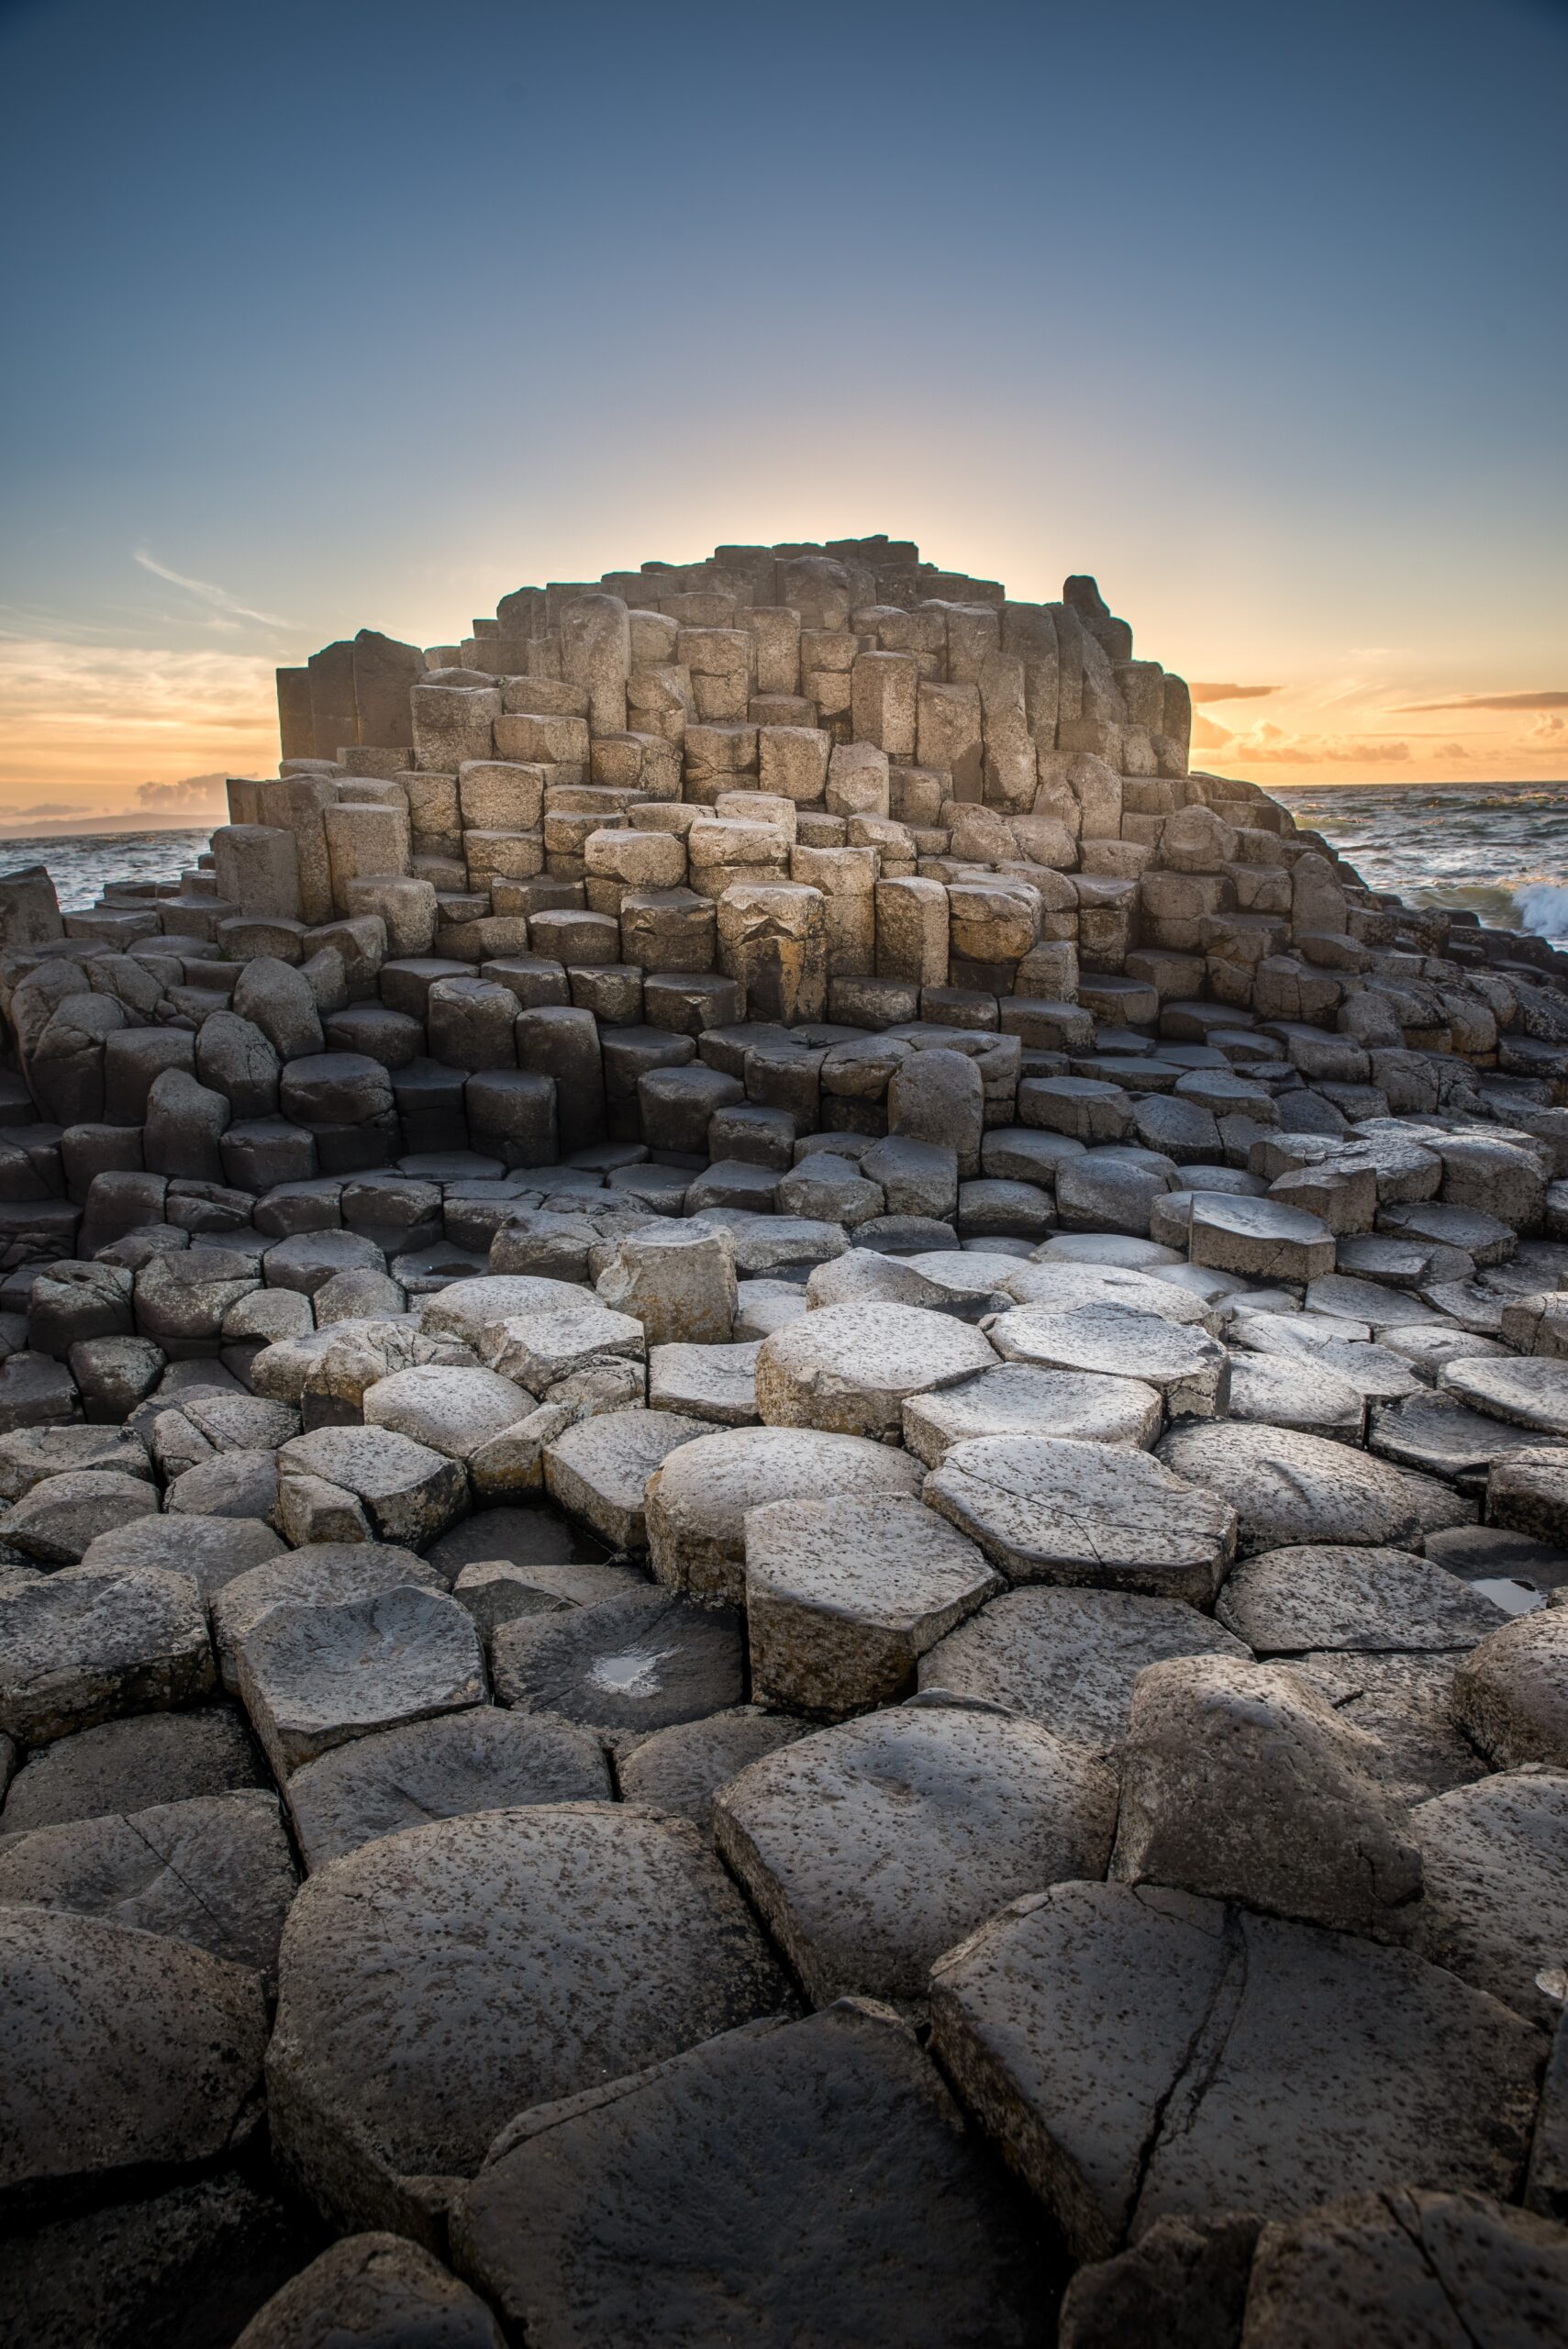 A Giant’s Causeway Tour from Belfast to the Coastal Route!